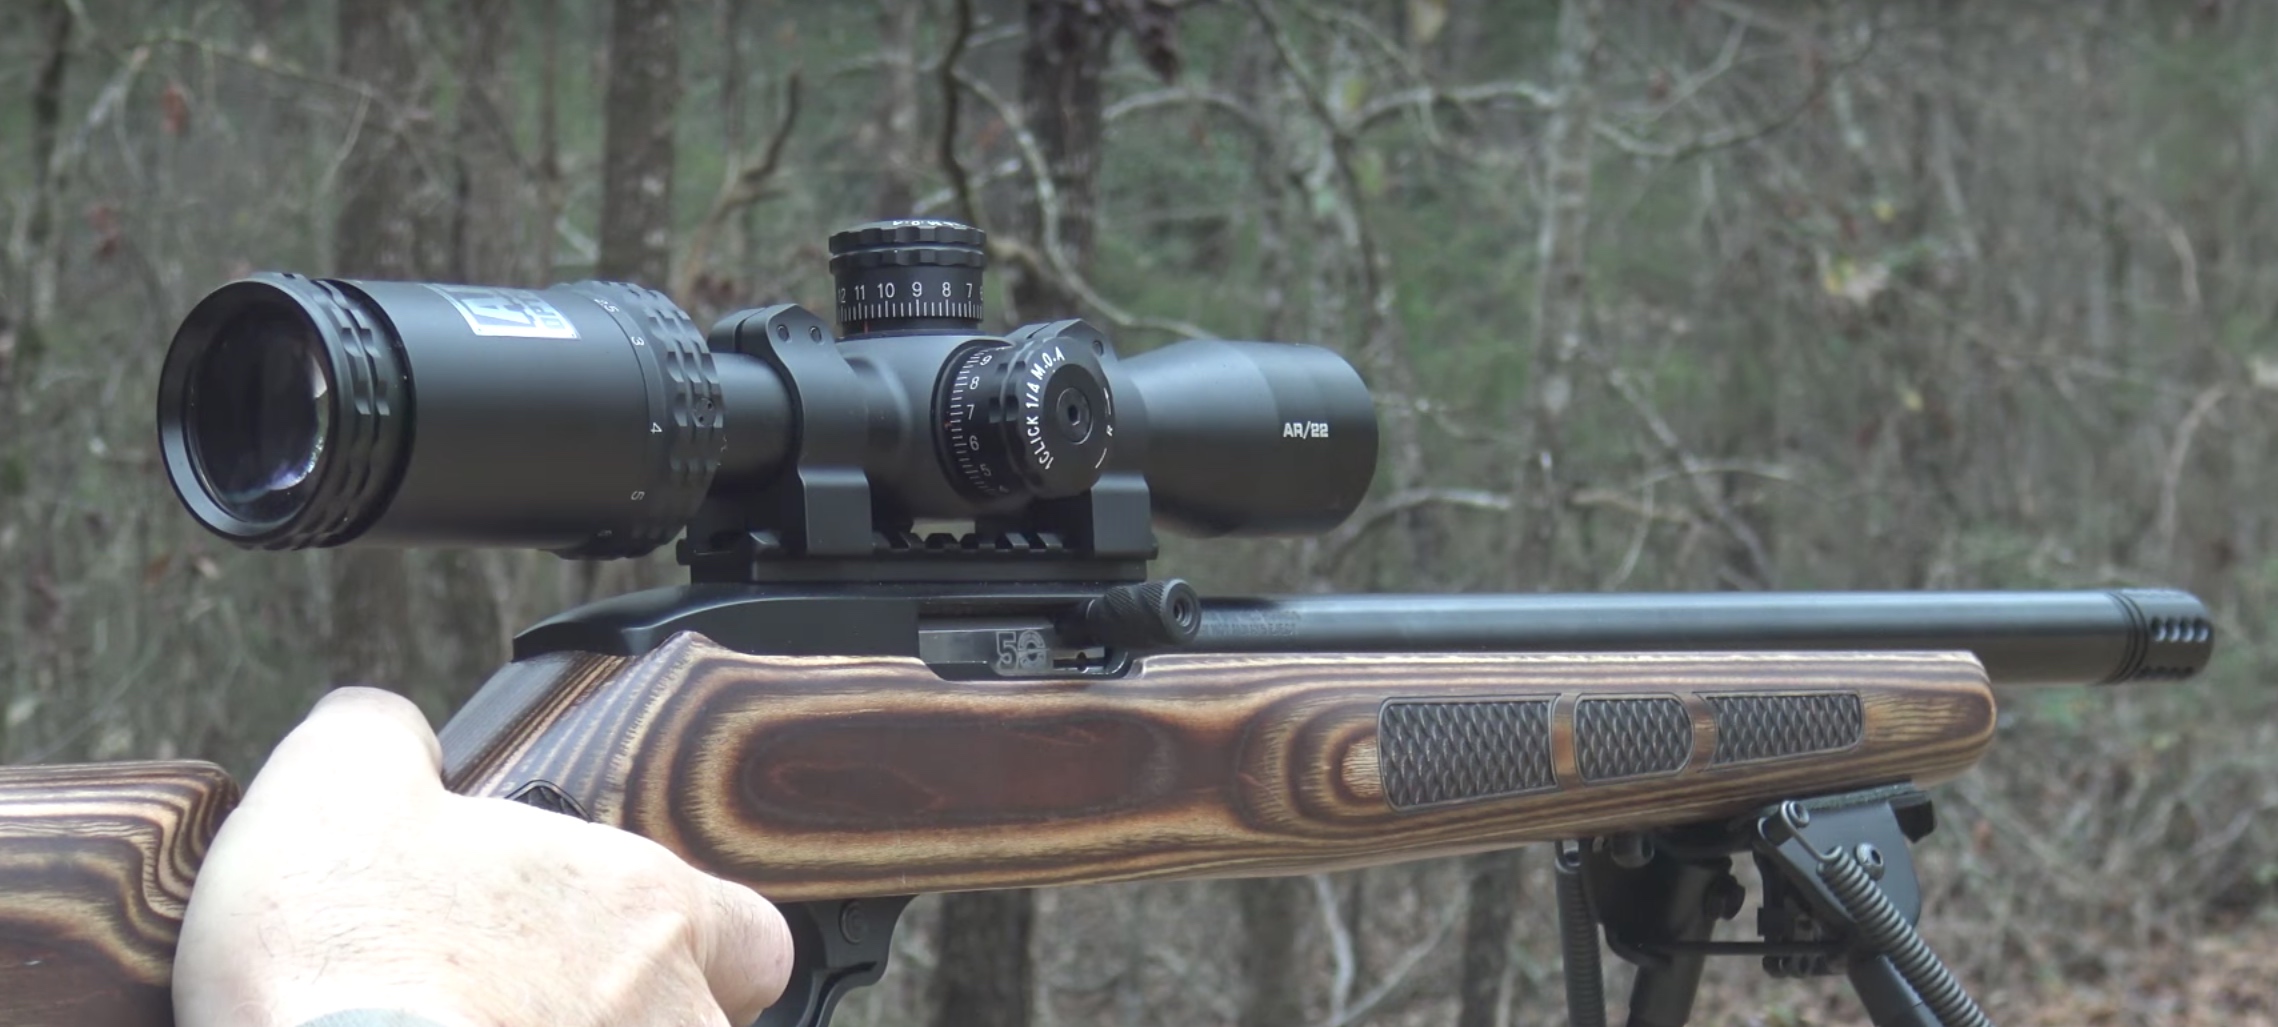 Rimfire vs. Centerfire: How Are These Two Types Of Scopes Different?